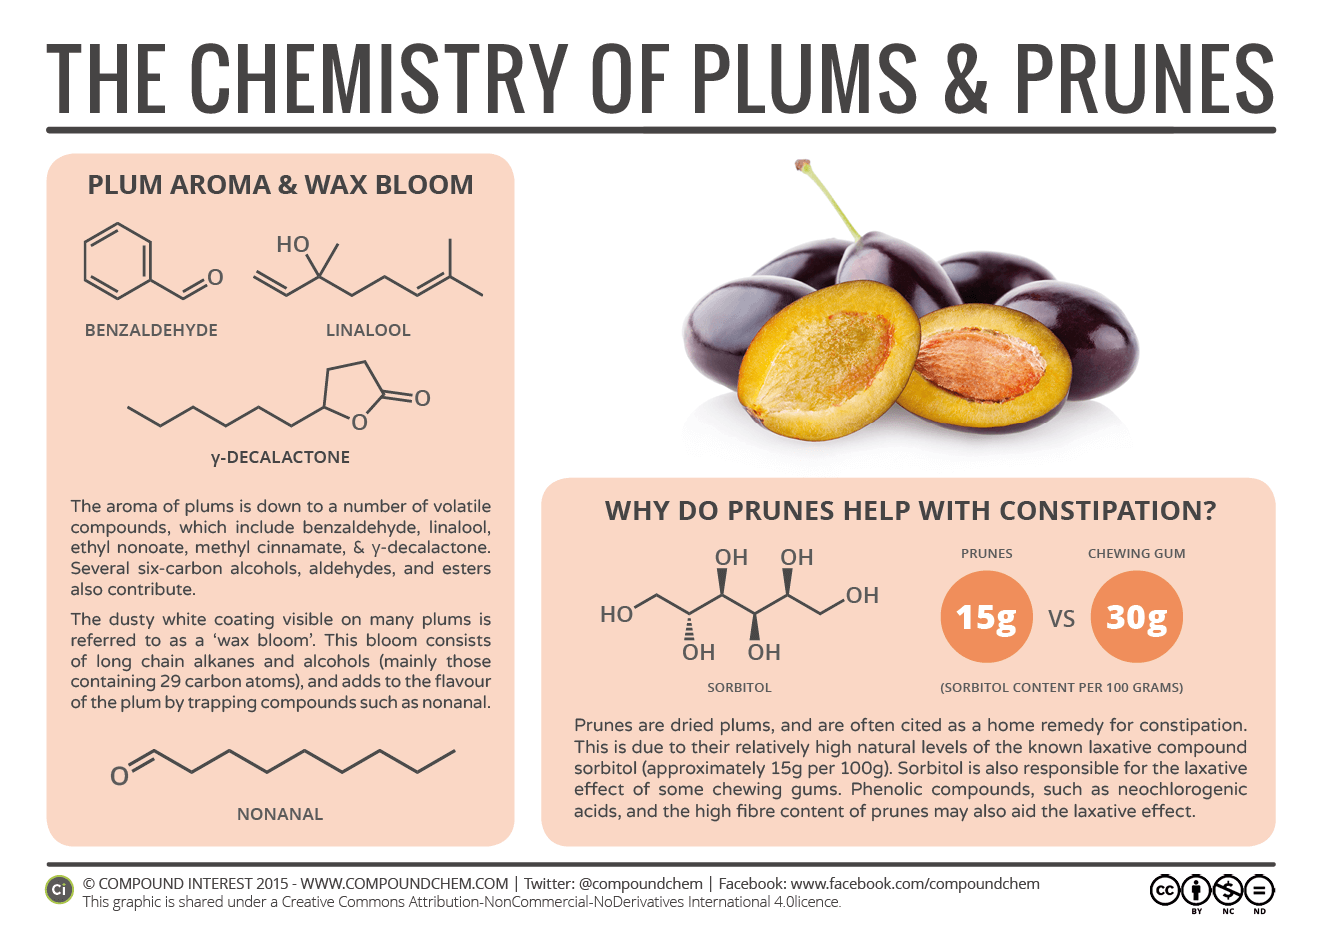 Prunes Help to Prevent Bone Loss and Protect Against Risk of Fractures